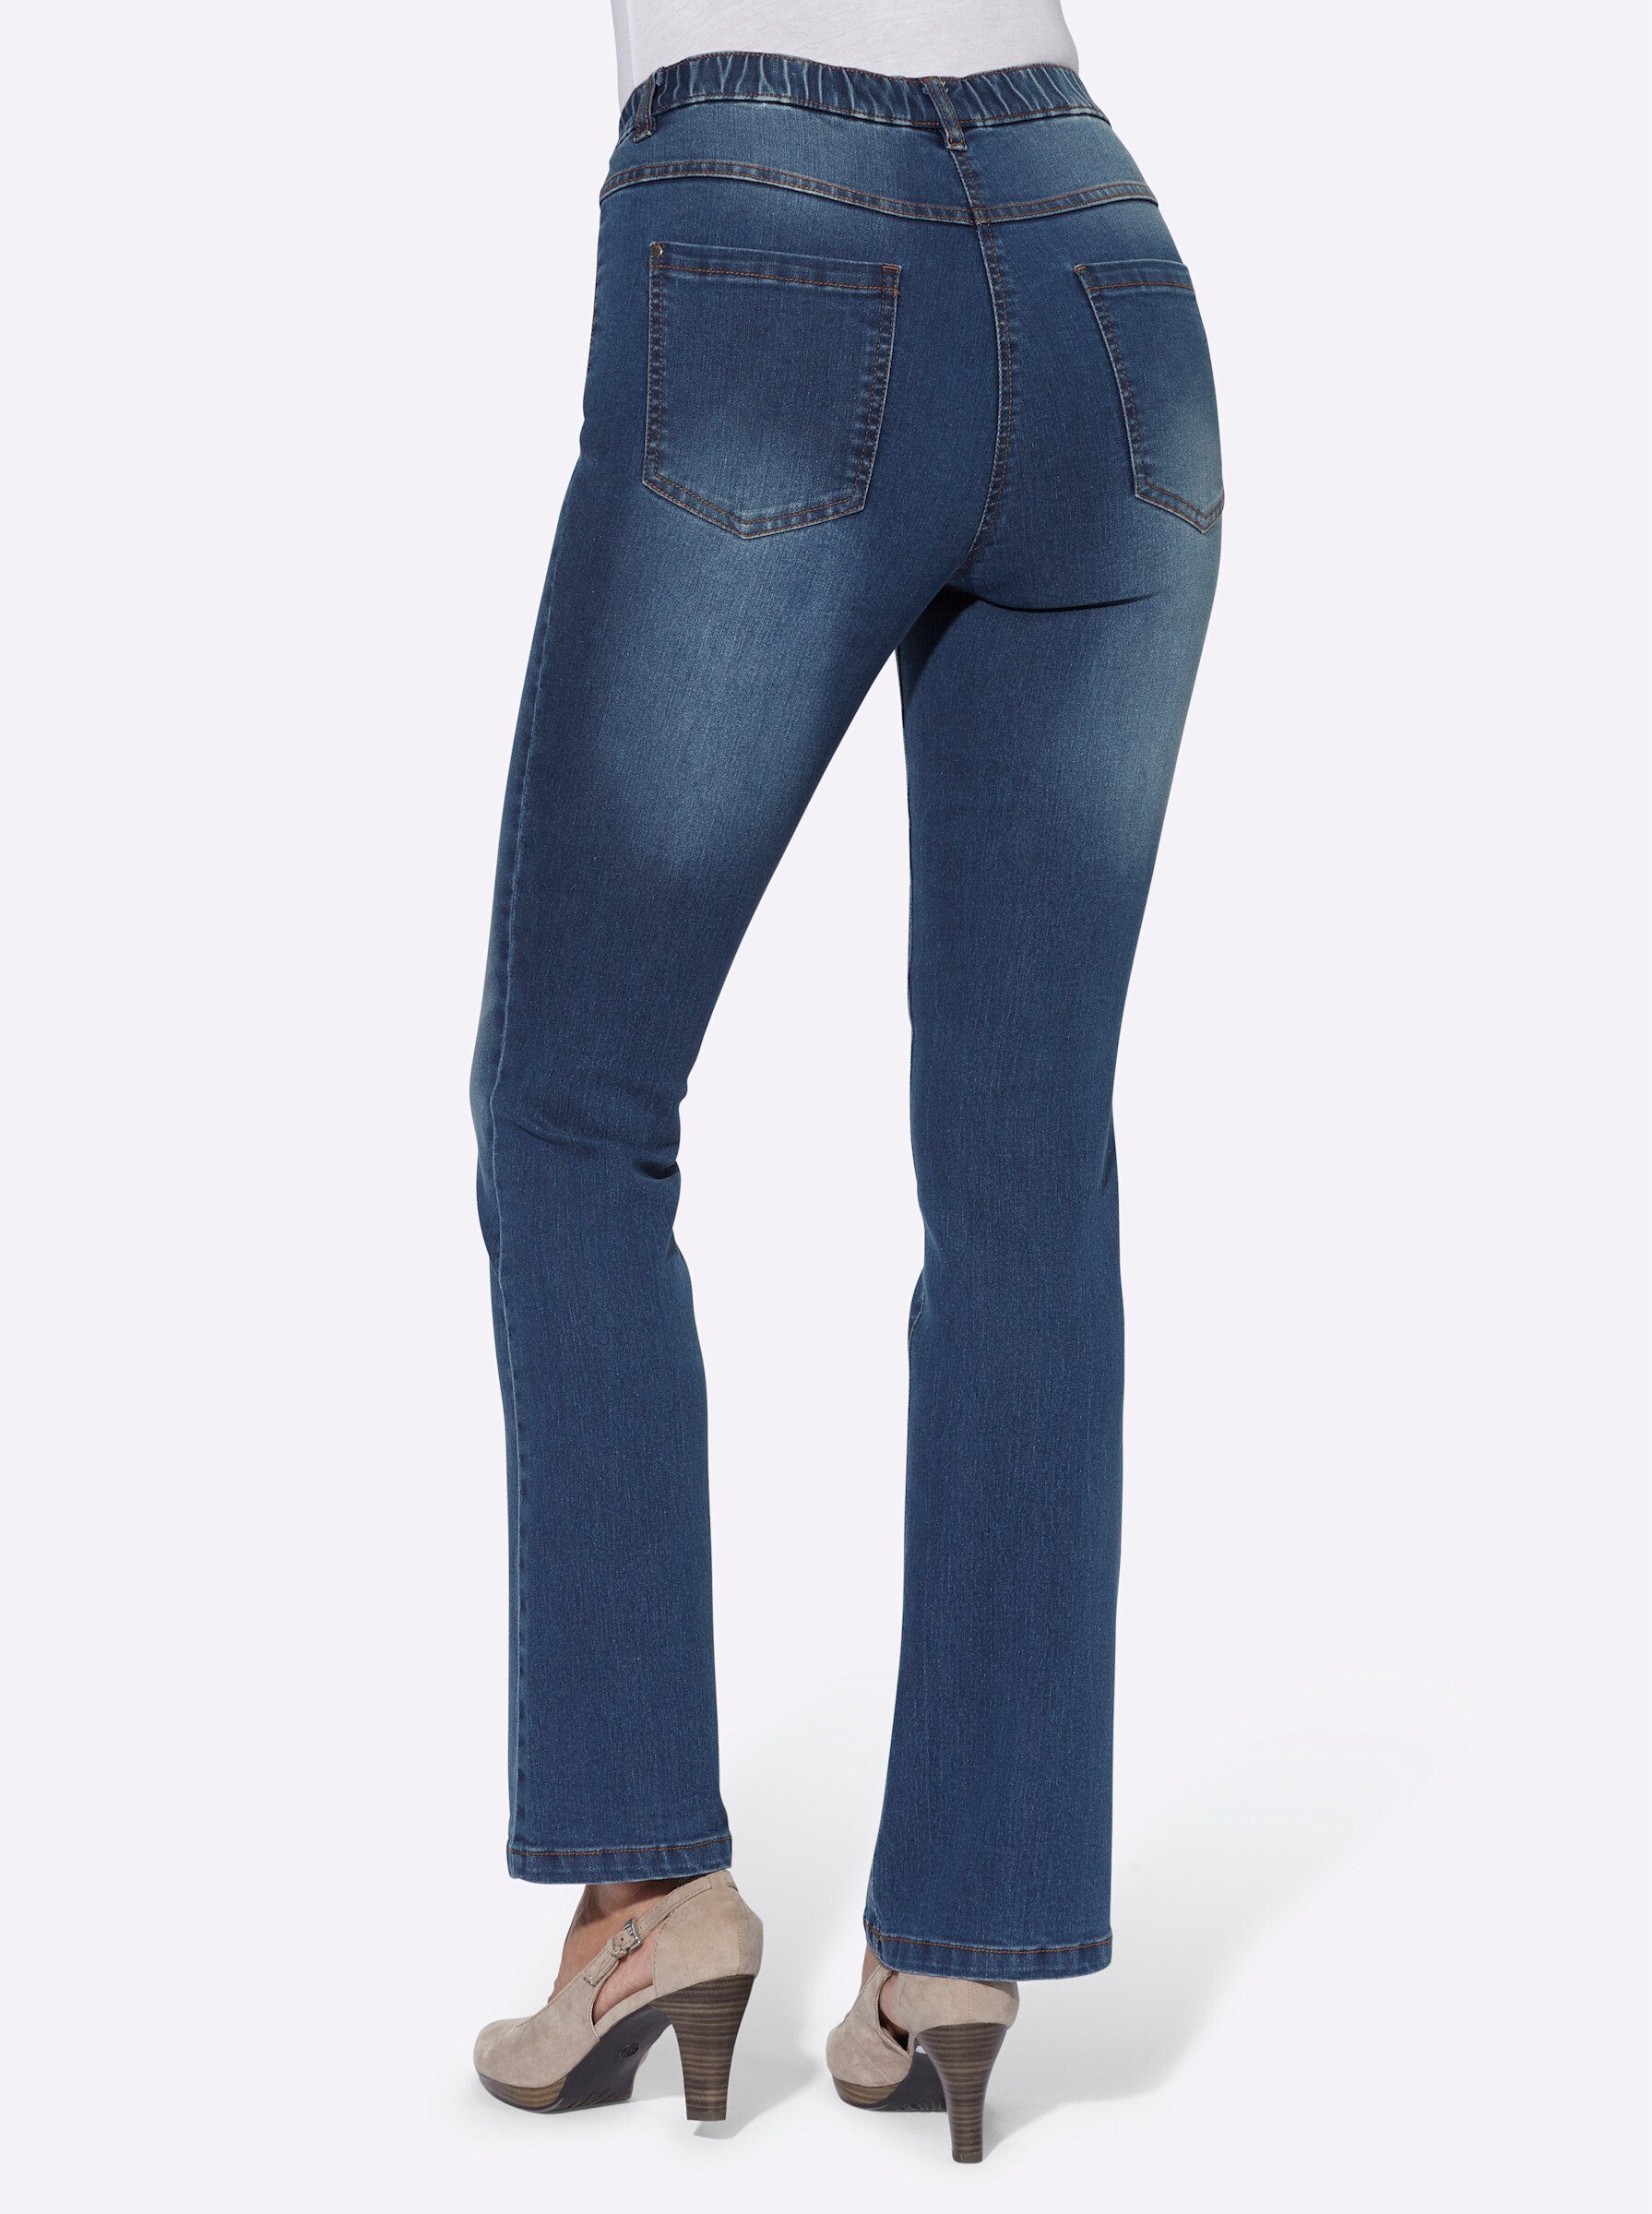 Sieh Bequeme an! blue-stone-washed Jeans